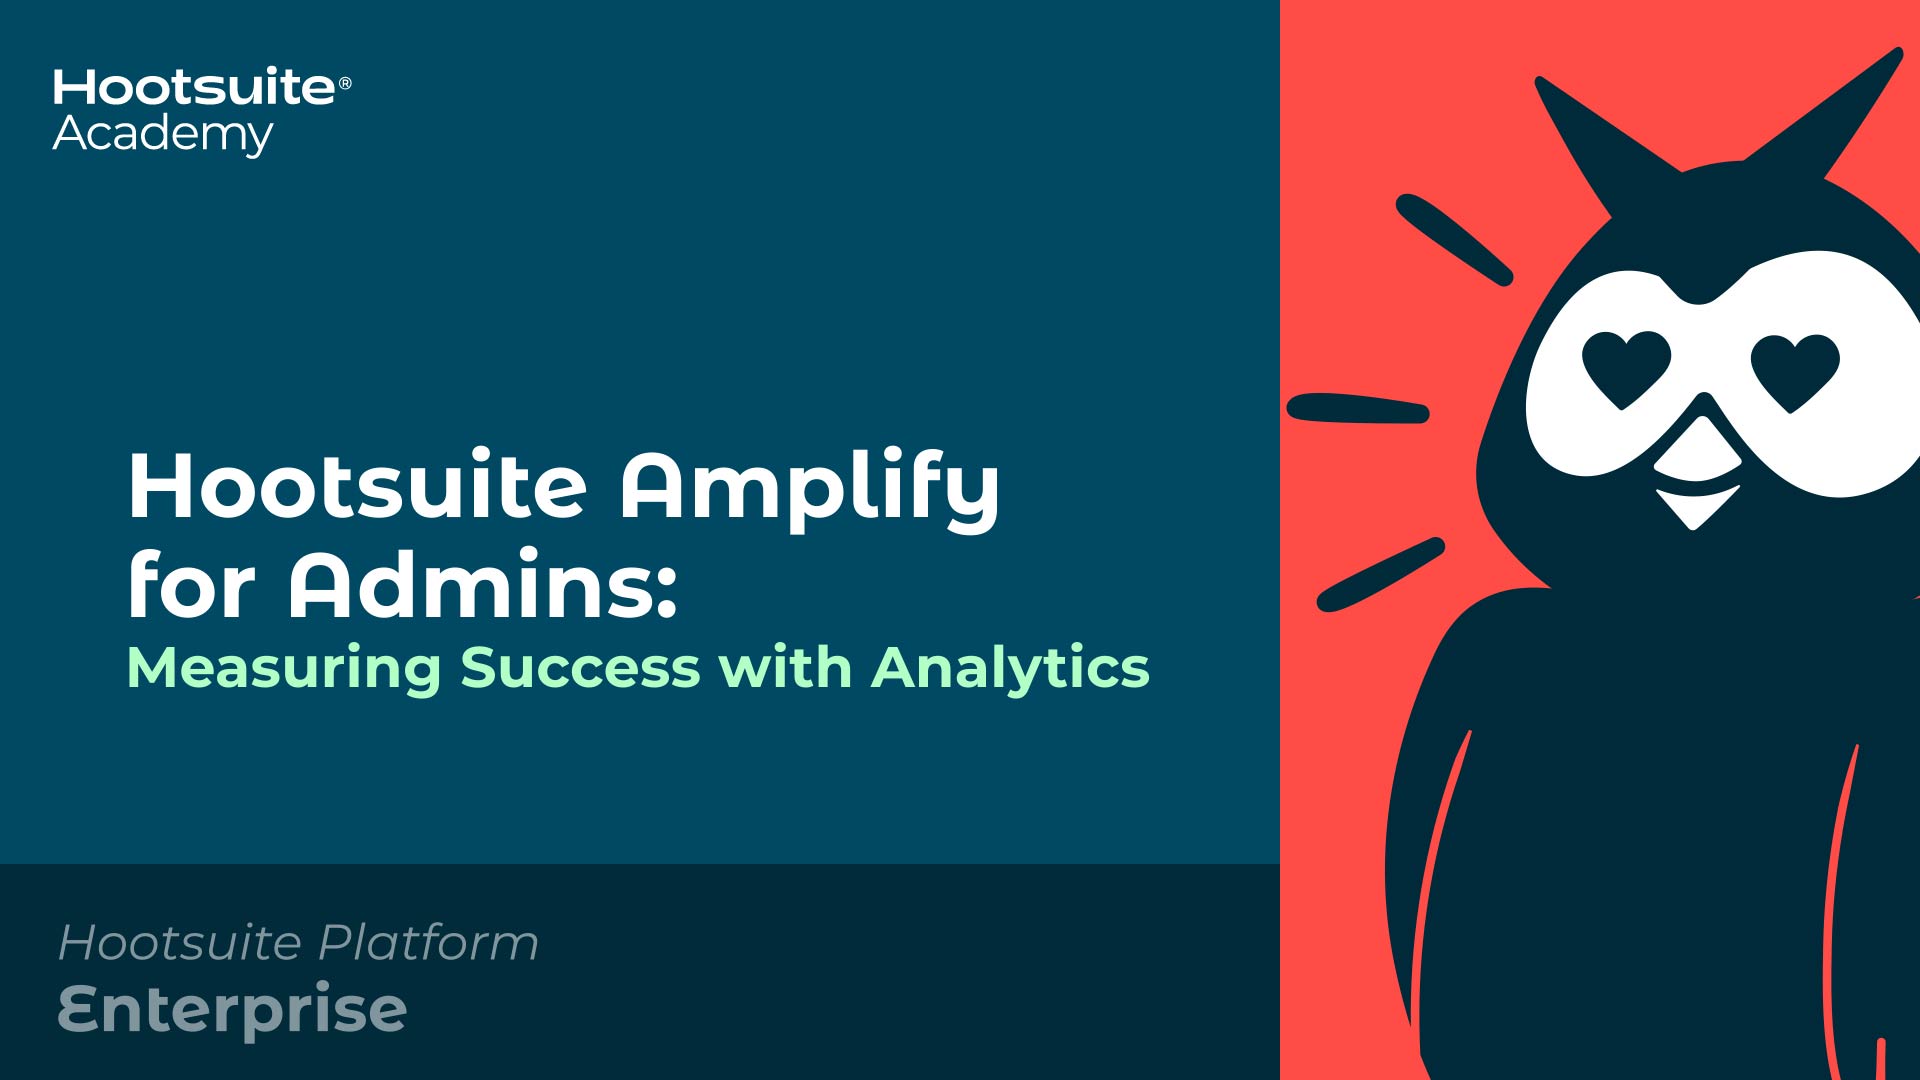 Measuring success with analytics video.